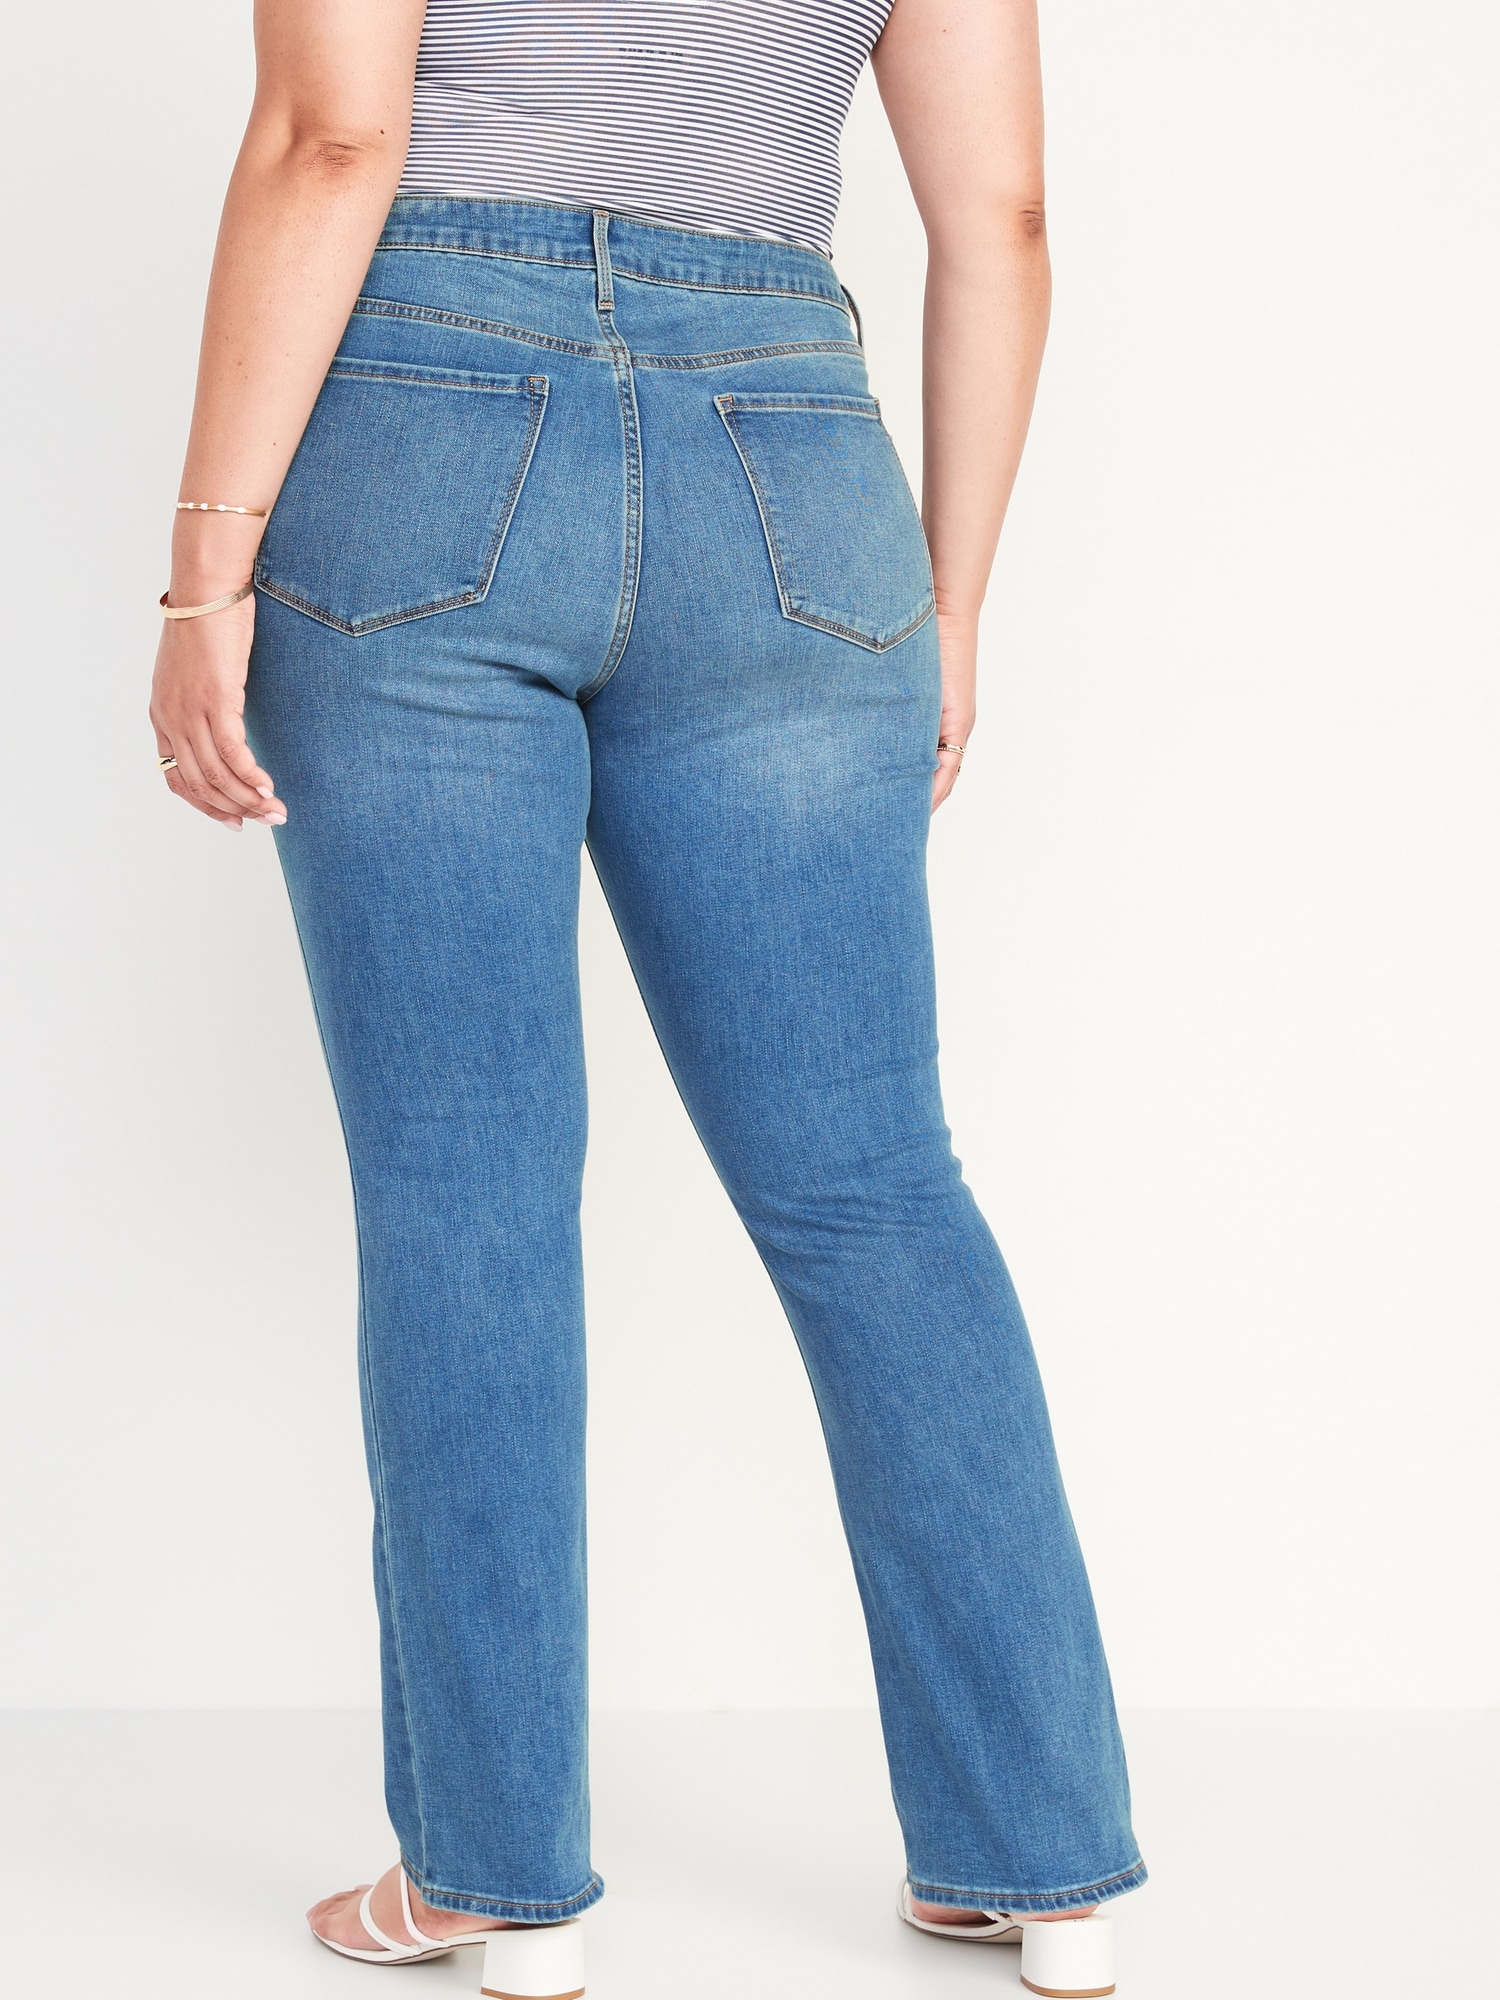 Mid-Rise Kicker Boot-Cut Jeans for Women | Old Navy